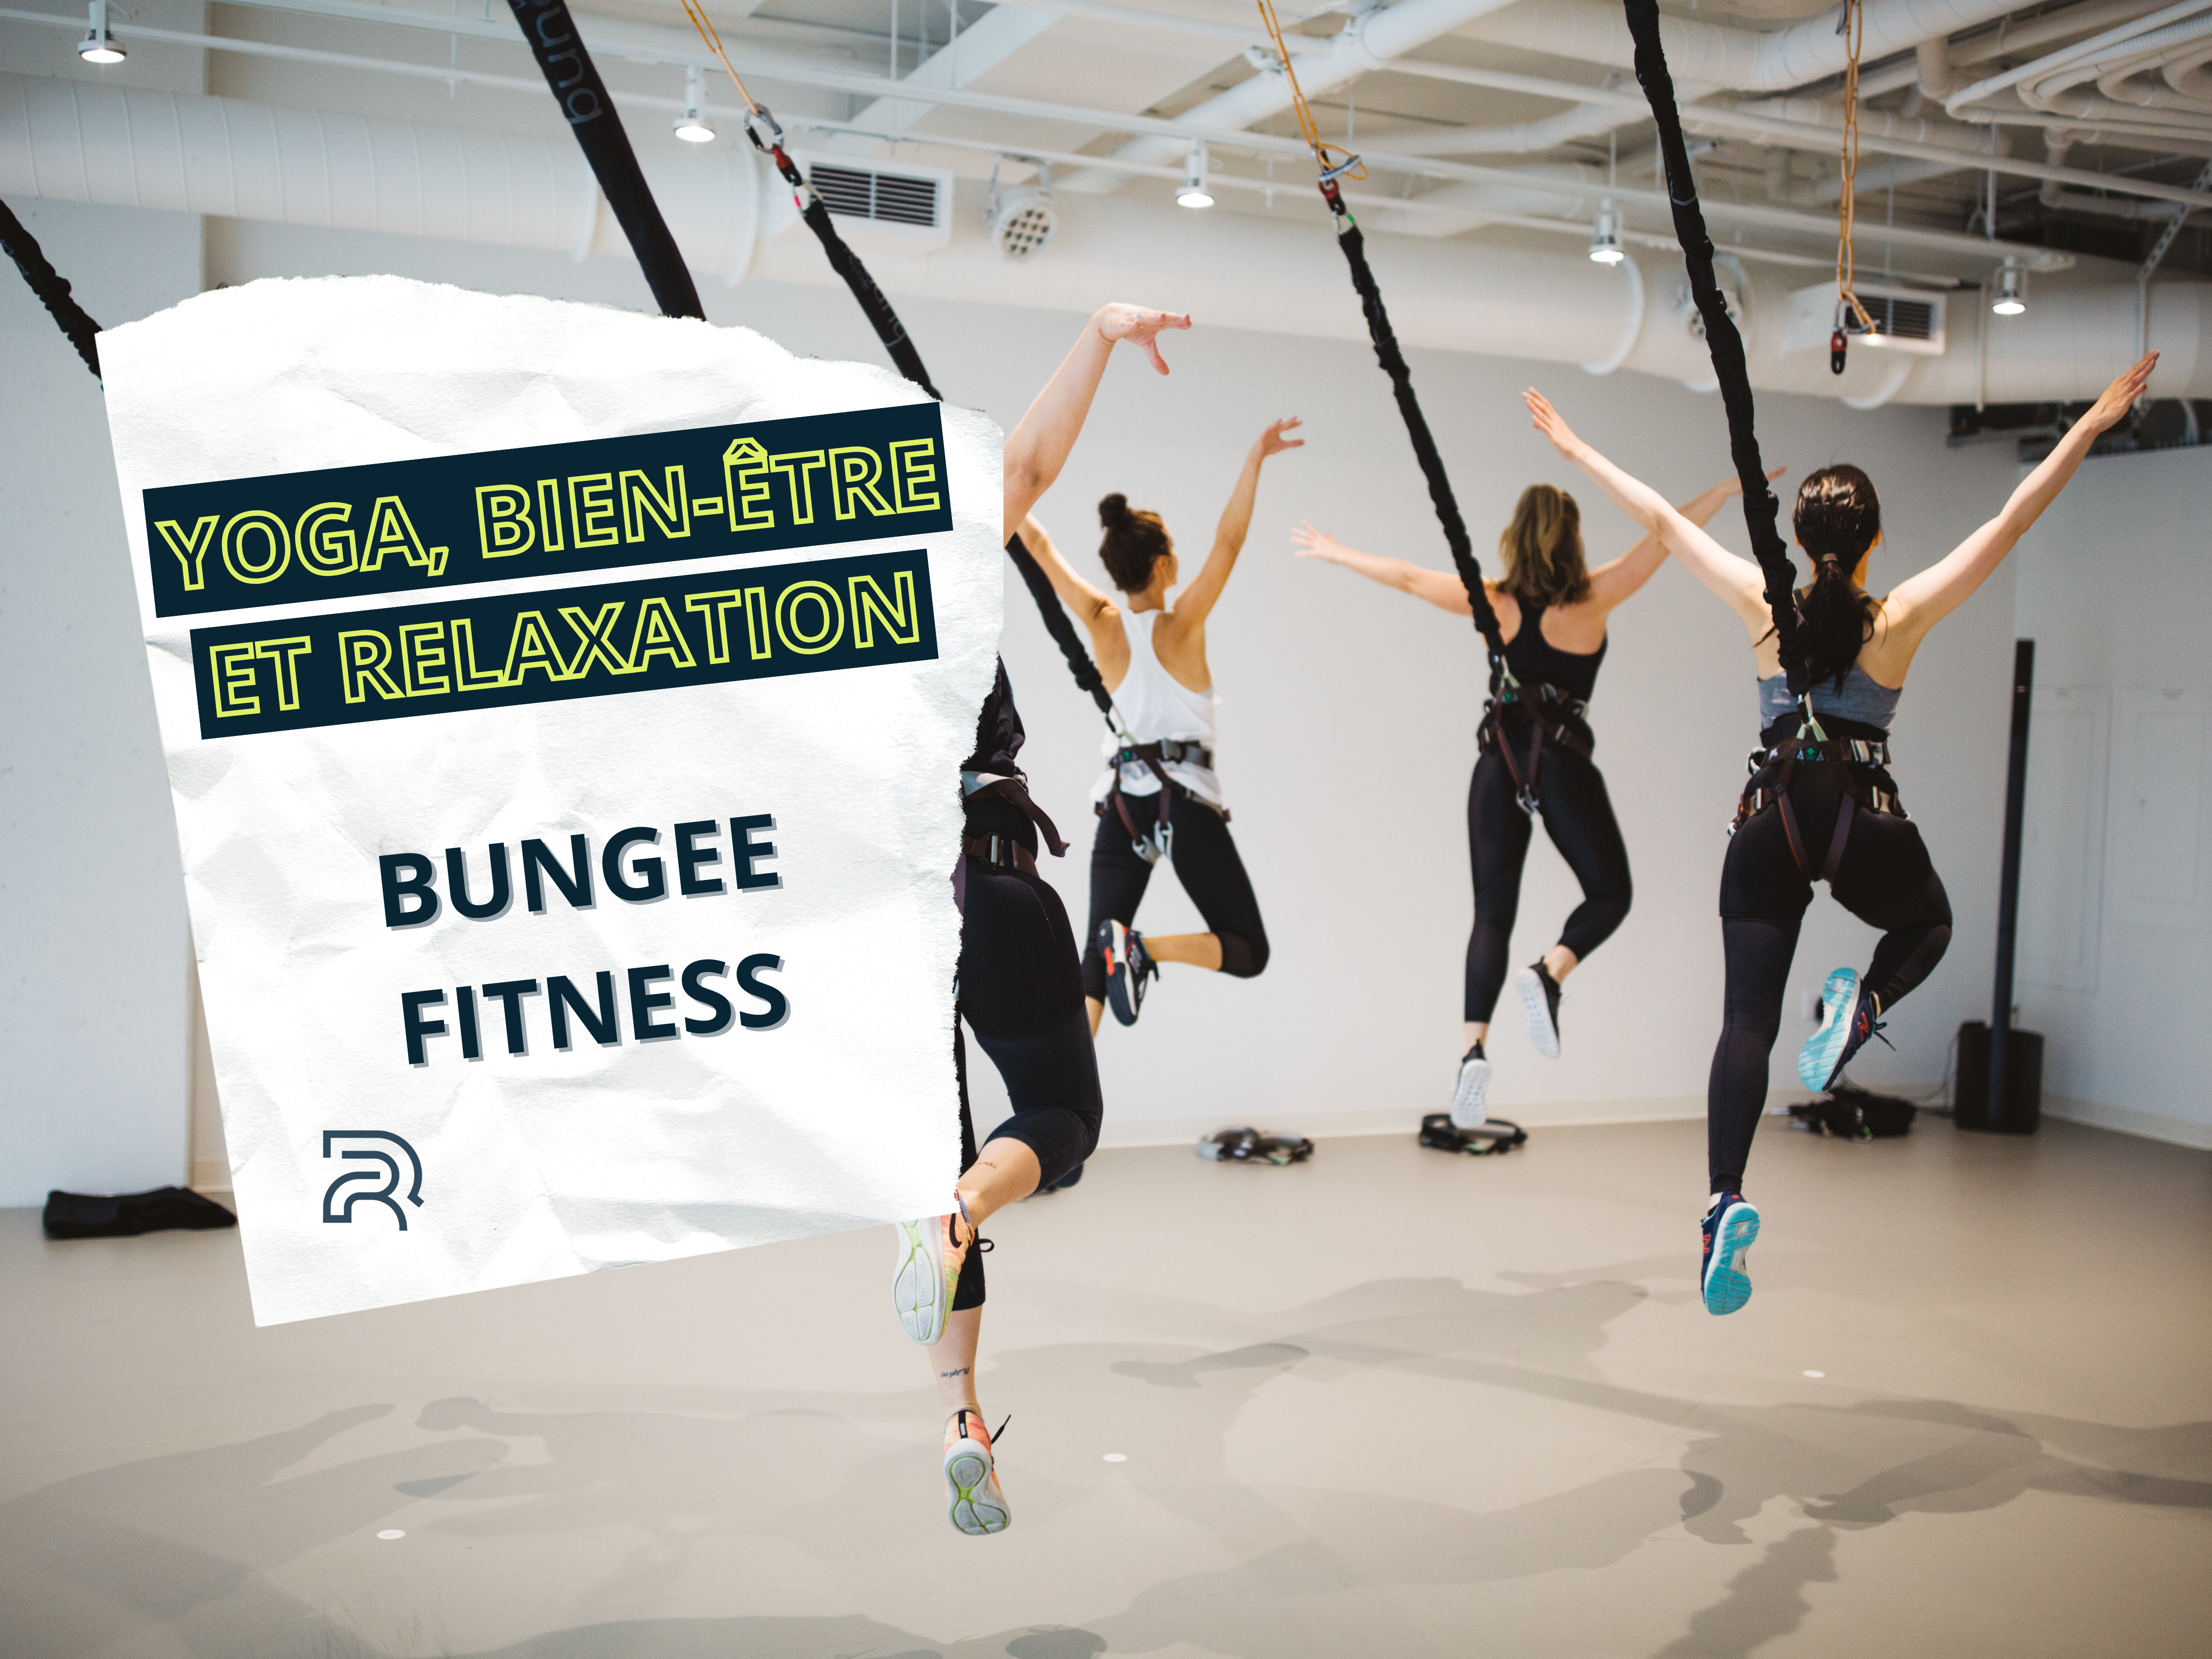 BUNGEE FITNESS